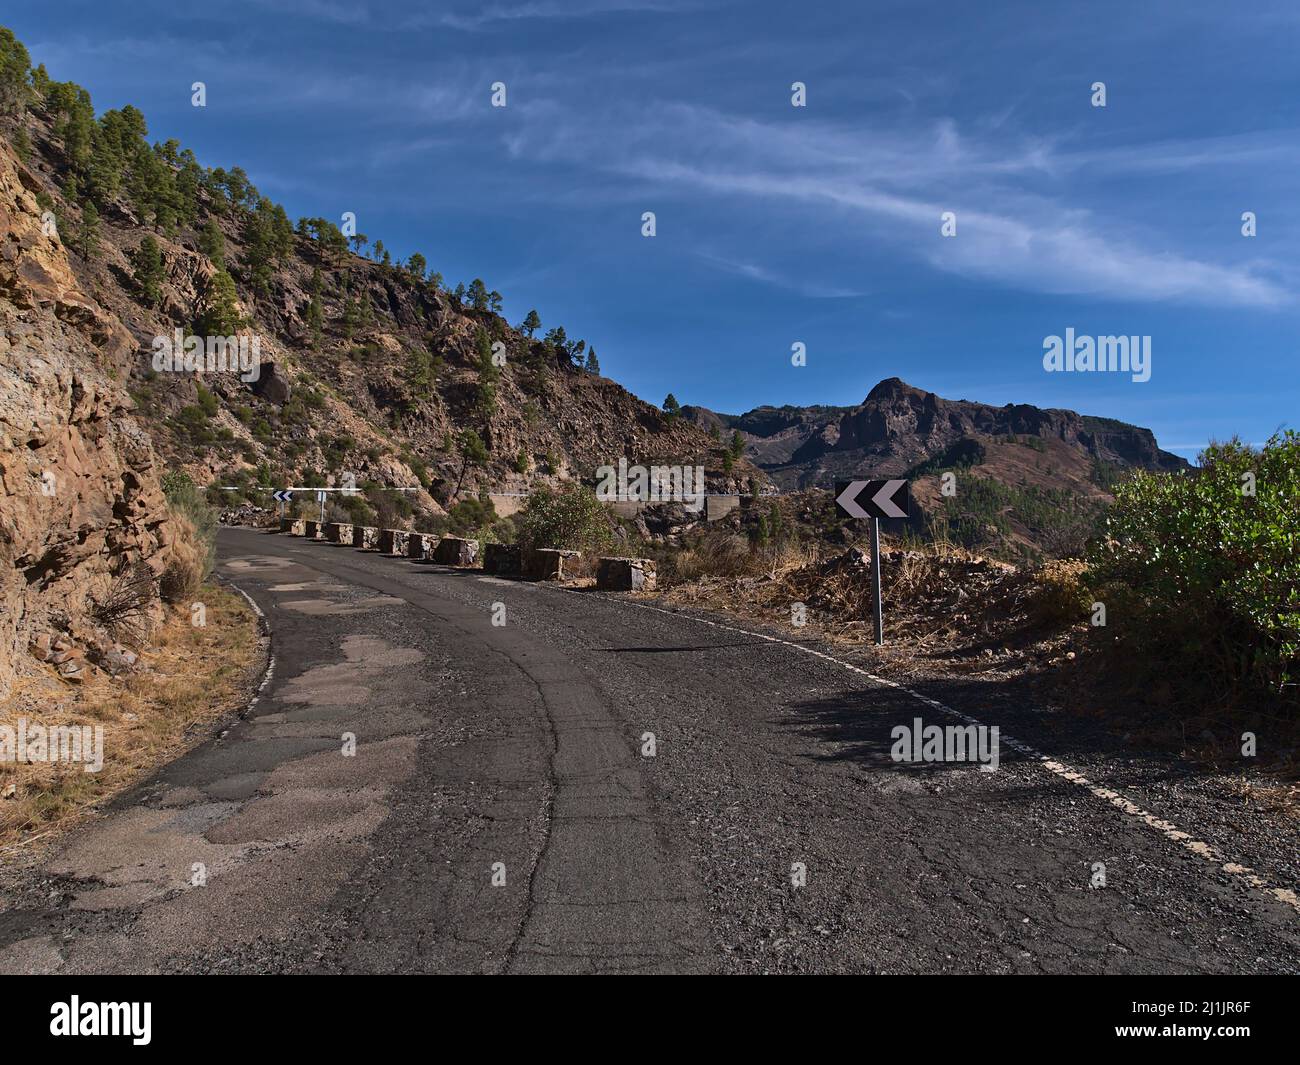 View of rural mountain road GC-605 in the mountains north of Mogan, Grand Canaria, Canary Islands, Spain on sunny day in bad condition with pine trees. Stock Photo